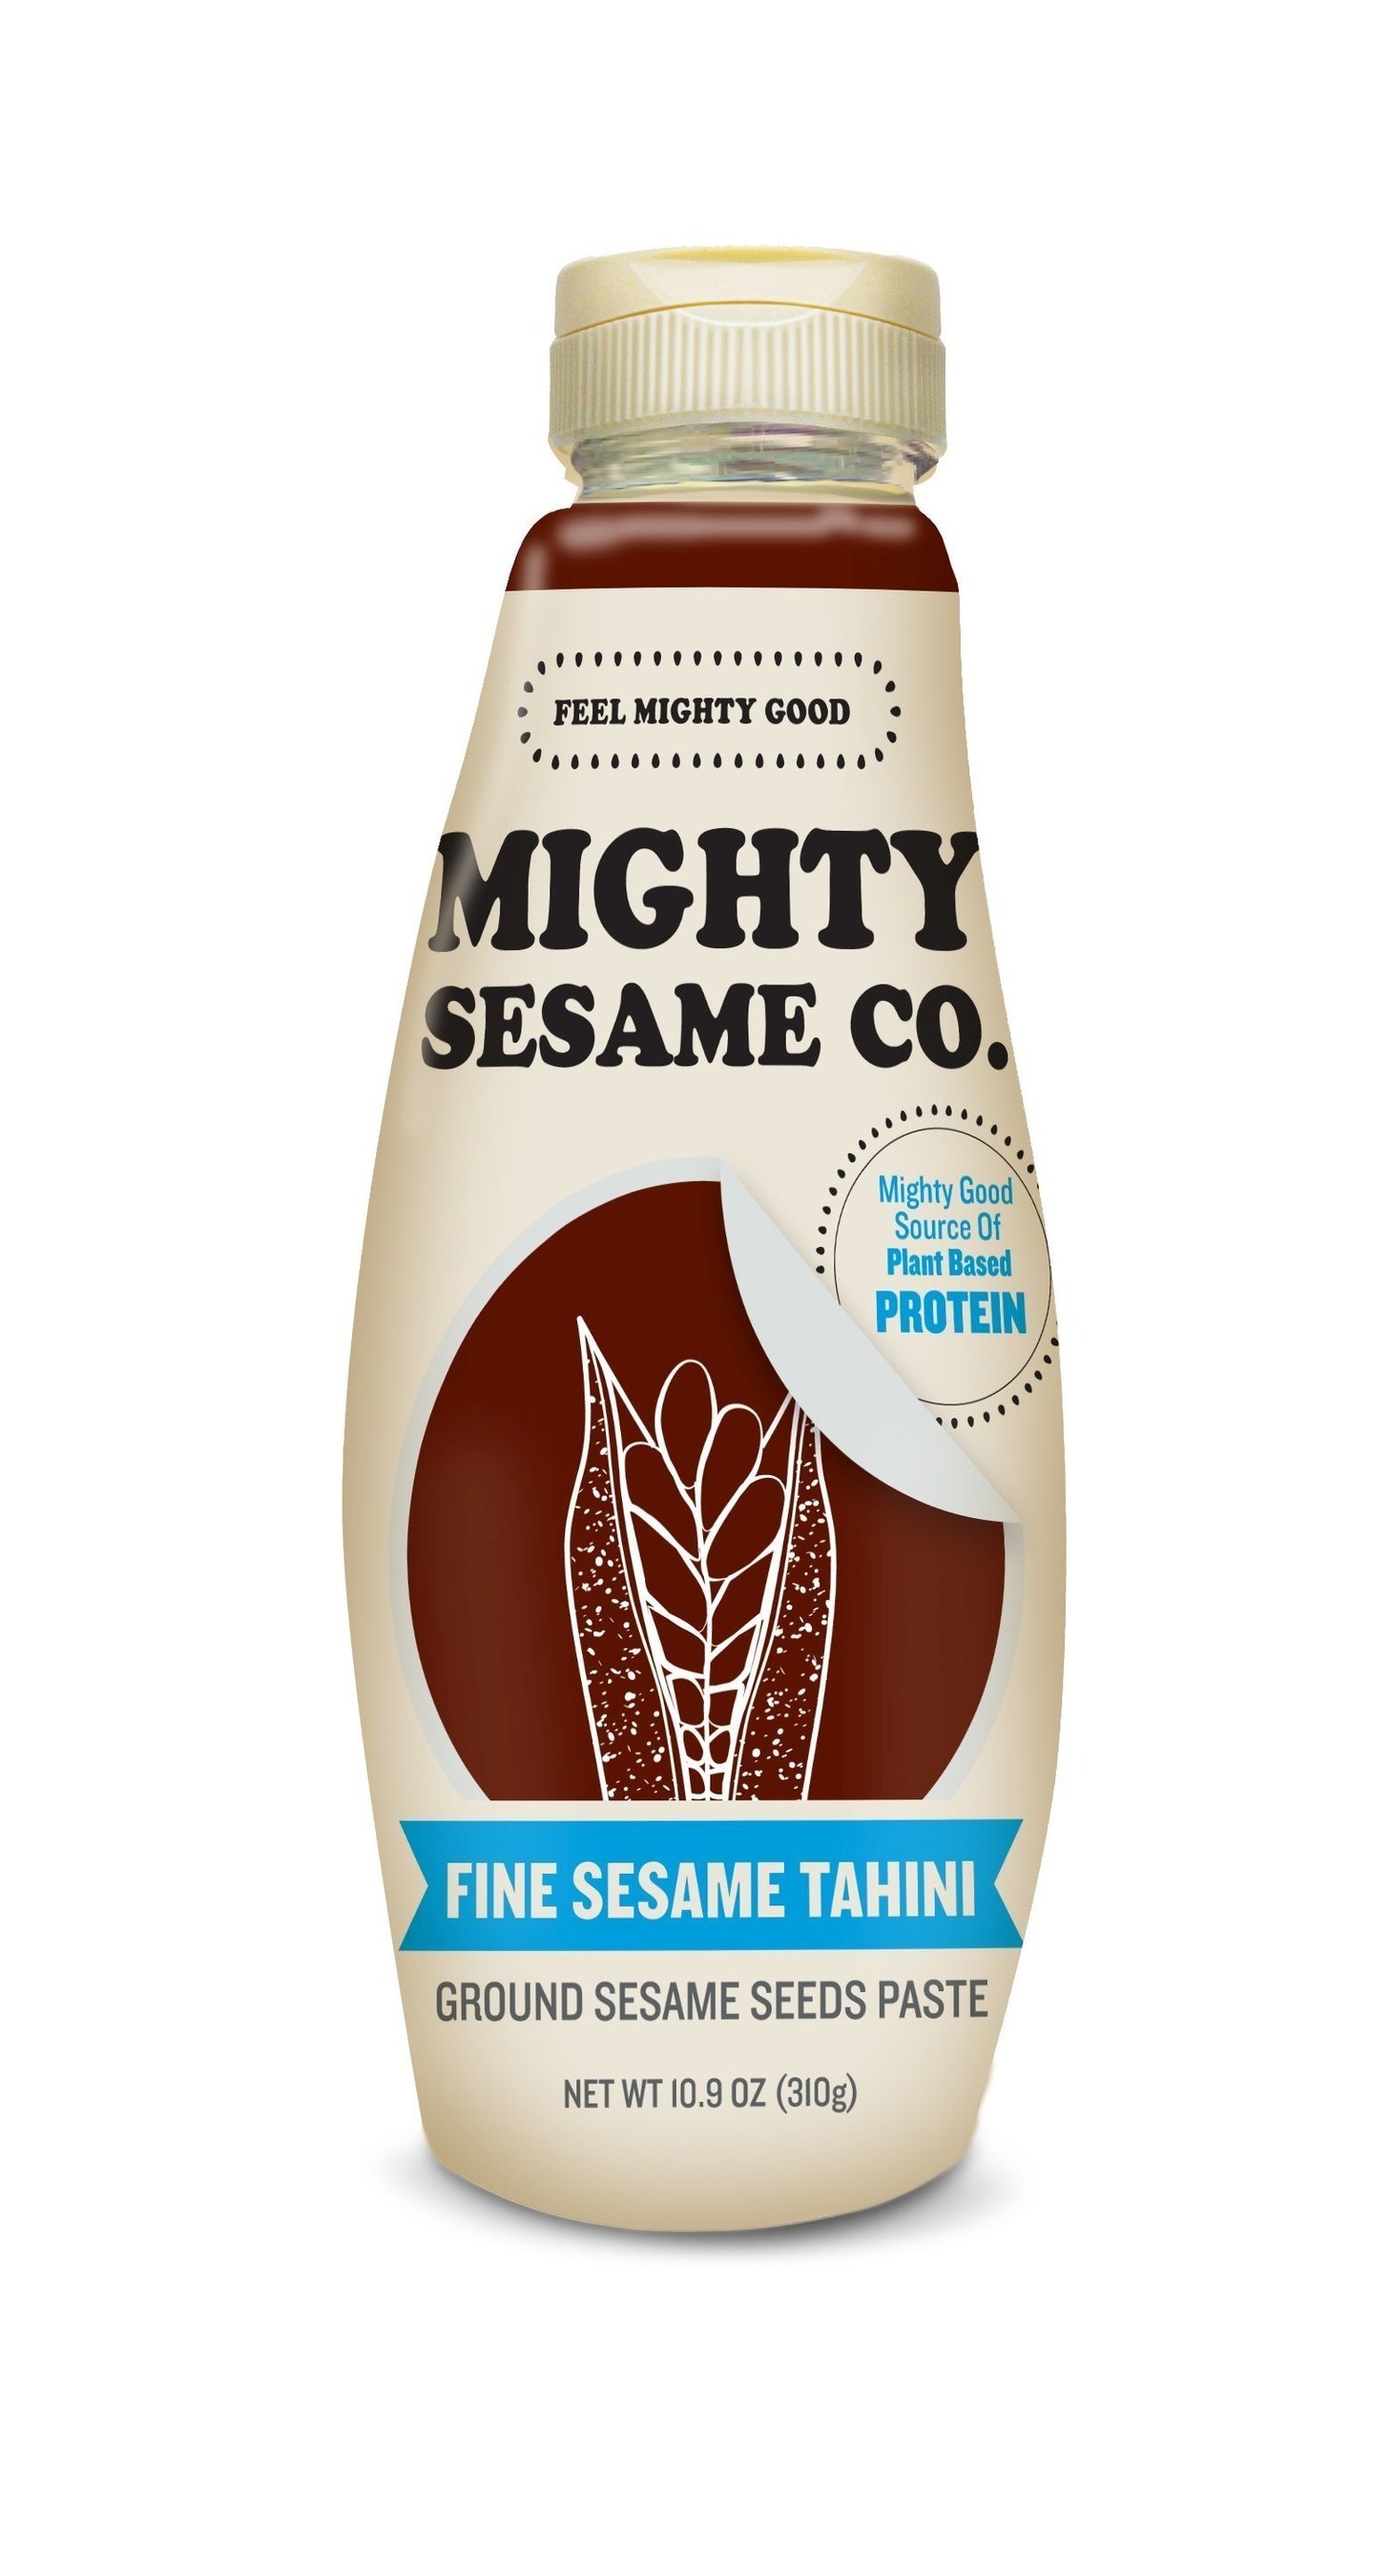 Mighty Sesame Co. Tahini Launches at Fancy Food